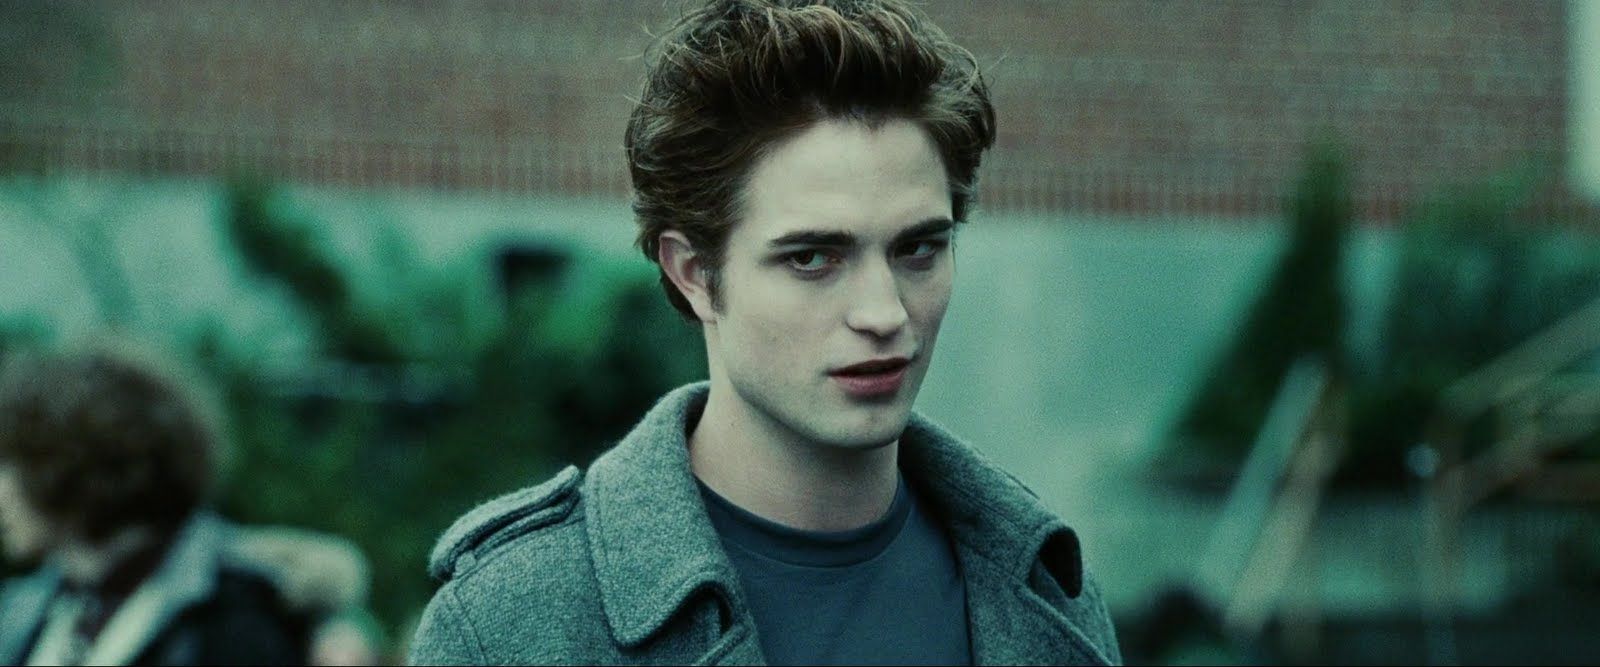 Robert Pattinson was almost sacked from Twilight for being too intense